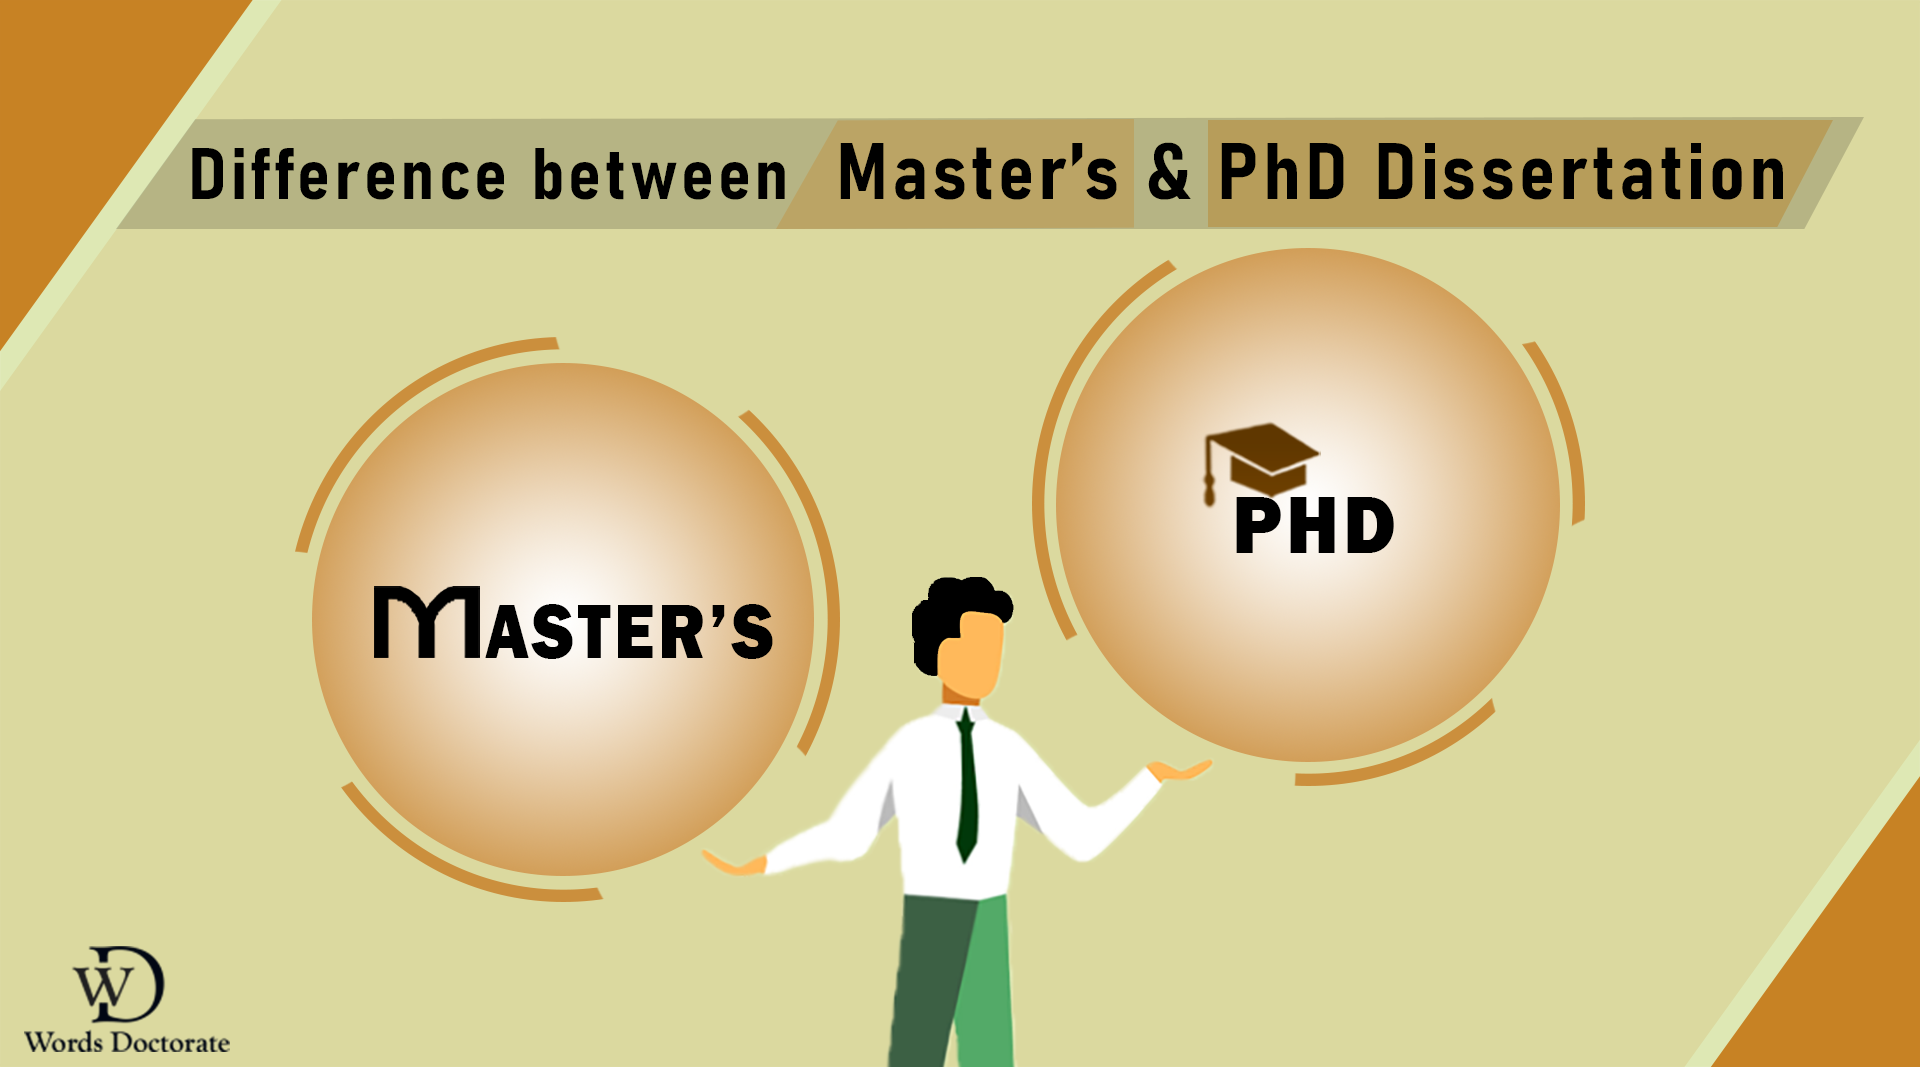 What's the difference between a master's thesis and a Ph.D. thesis? - Quora